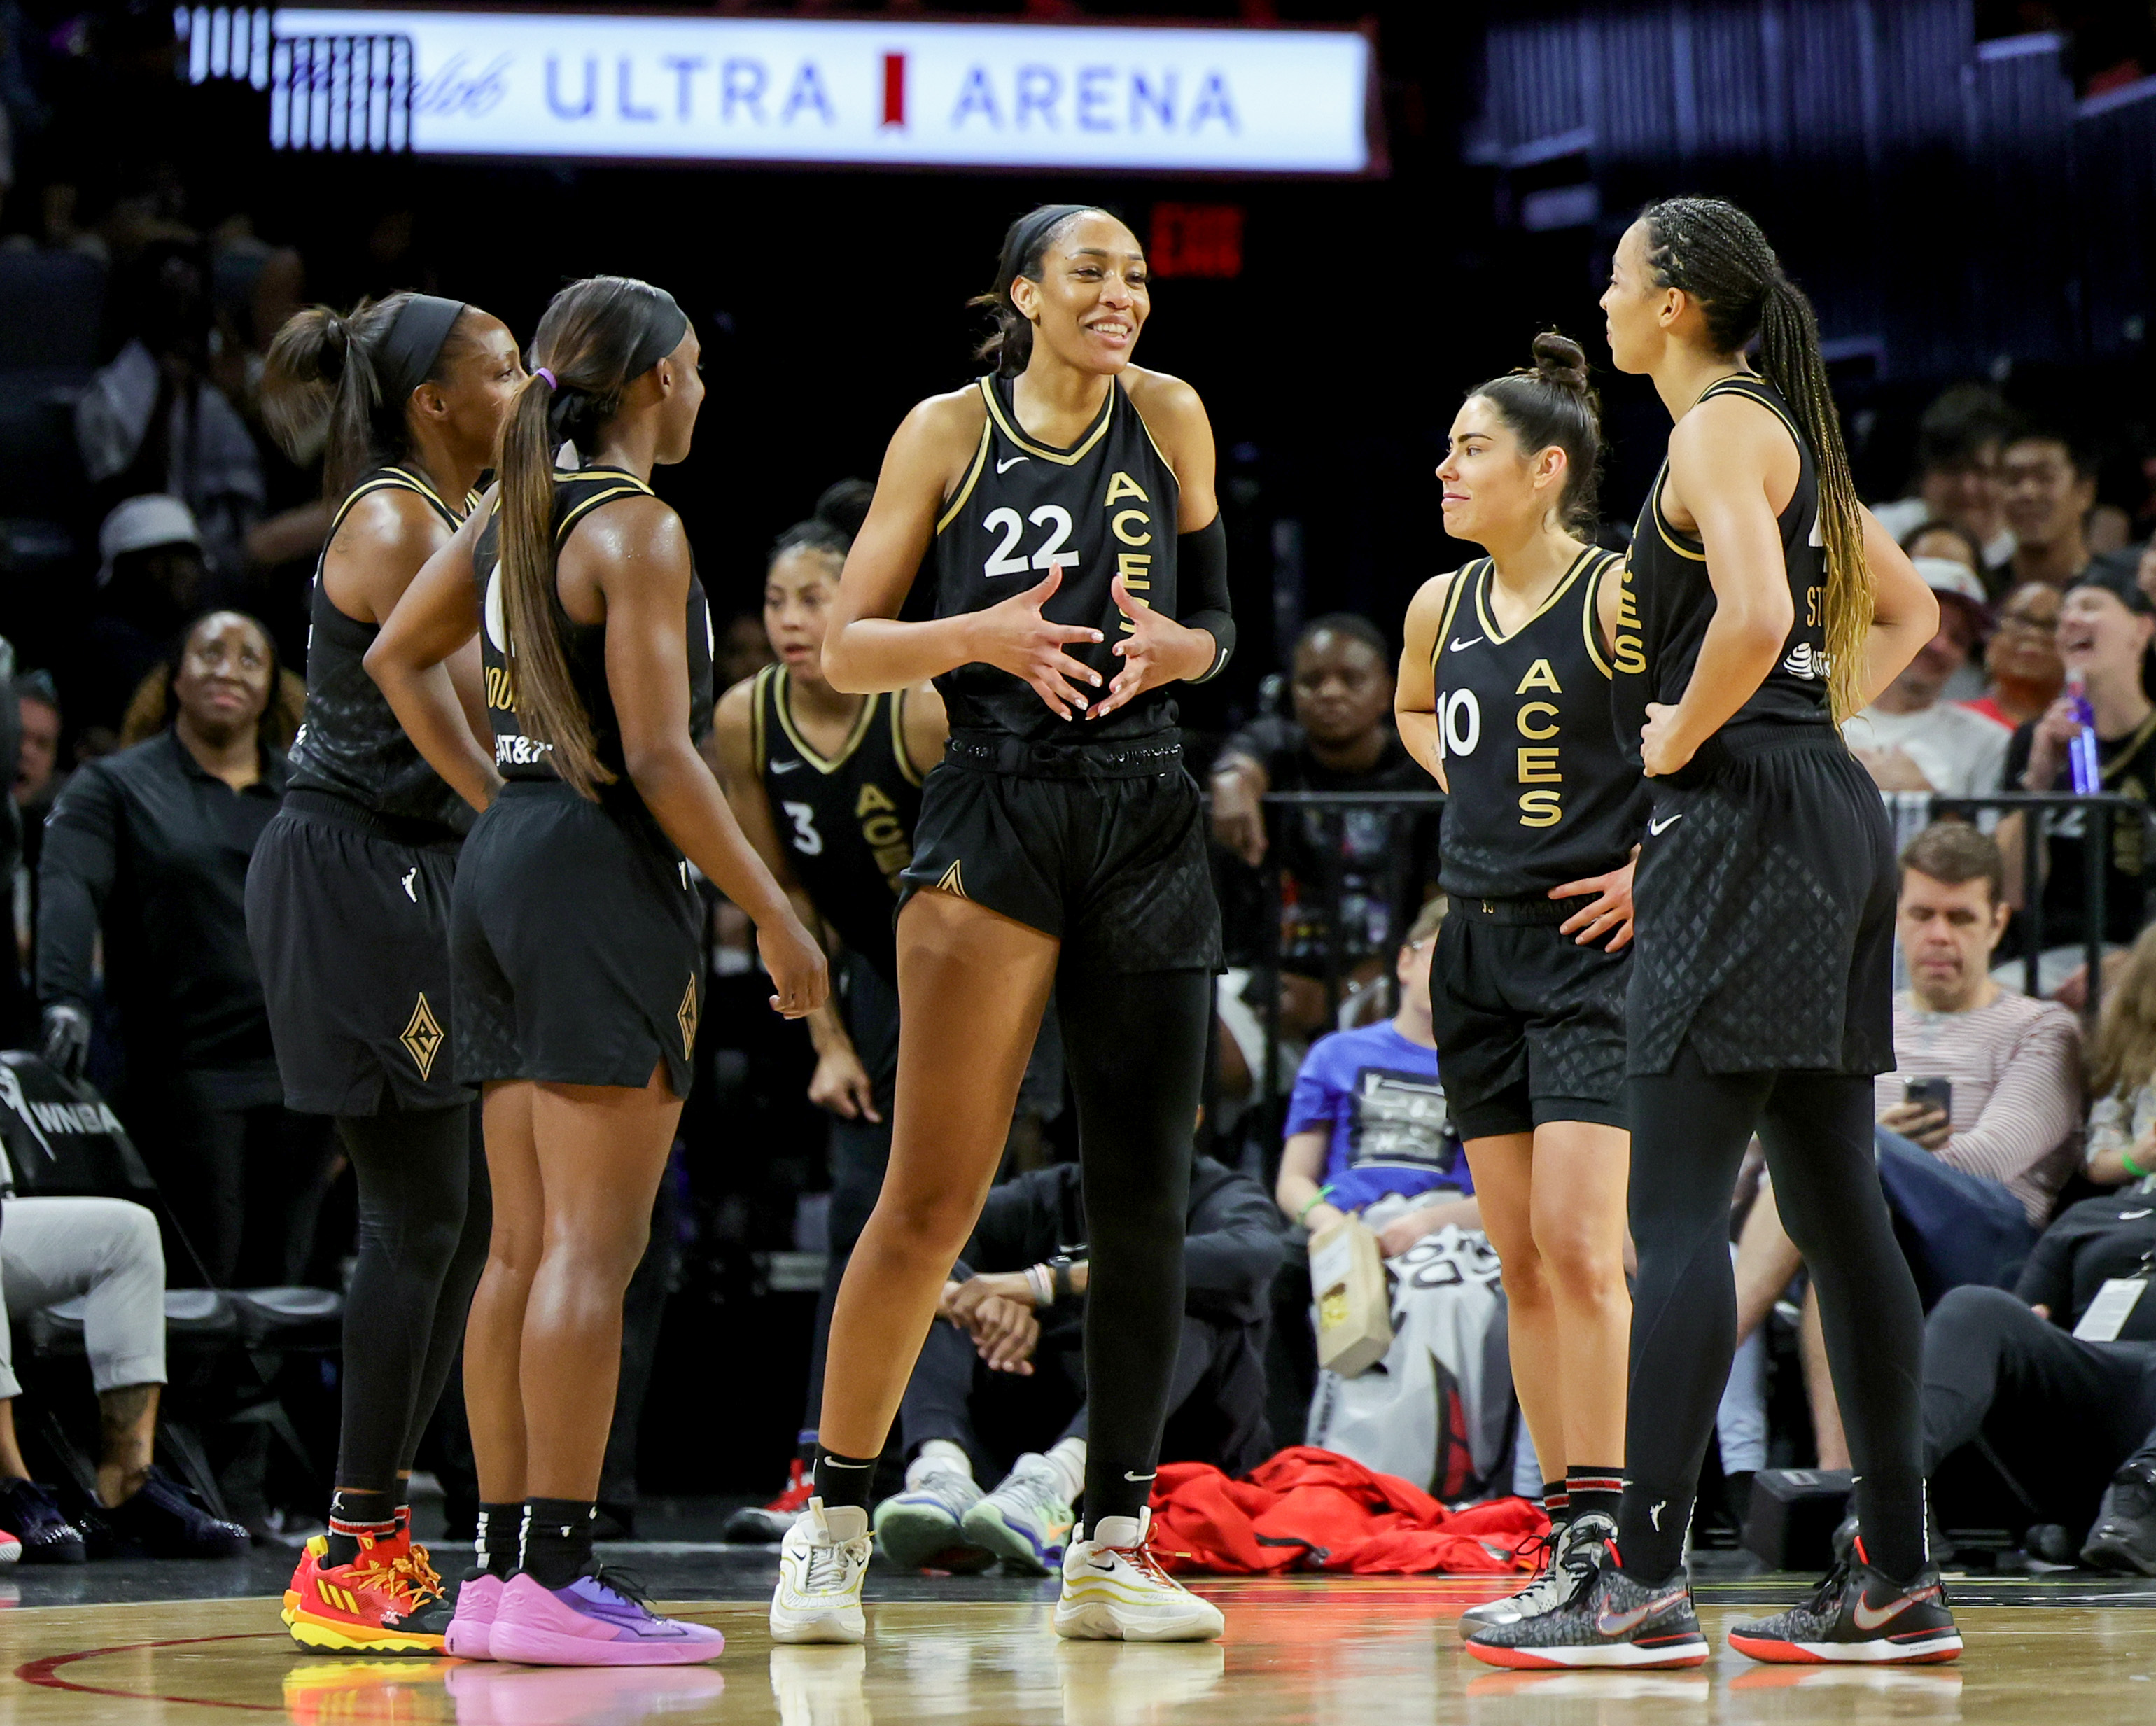 LAS VEGAS, NEVADA - MAY 28: (L-R) Chelsea Gray #12, Jackie Young #0, A’ja Wilson #22, Kelsey Plum #10 and Kiah Stokes #41 of the Las Vegas Aces talk during a timeout in the fourth quarter of their game against the Minnesota Lynx at Michelob ULTRA Arena on May 28, 2023 in Las Vegas, Nevada. The Aces defeated the Lynx 94-73.&nbsp;